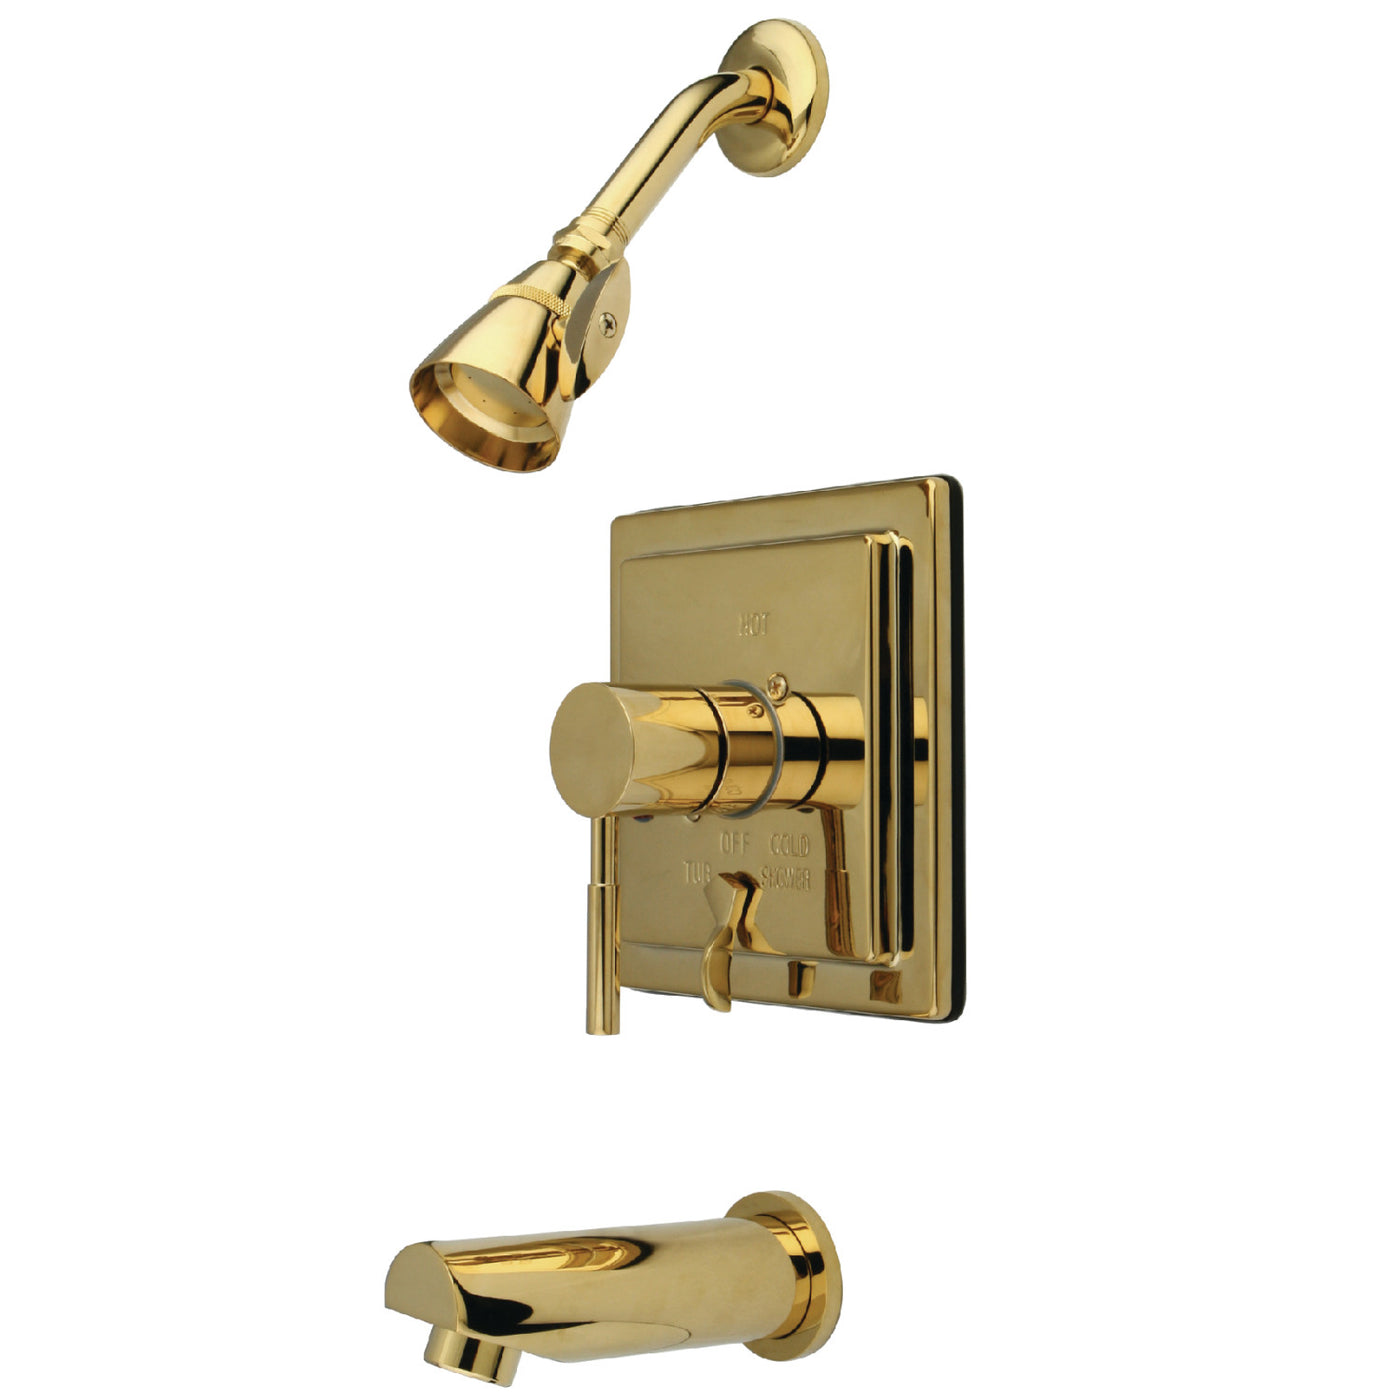 Elements of Design EB86520DL Single-Handle Tub and Shower Faucet, Polished Brass